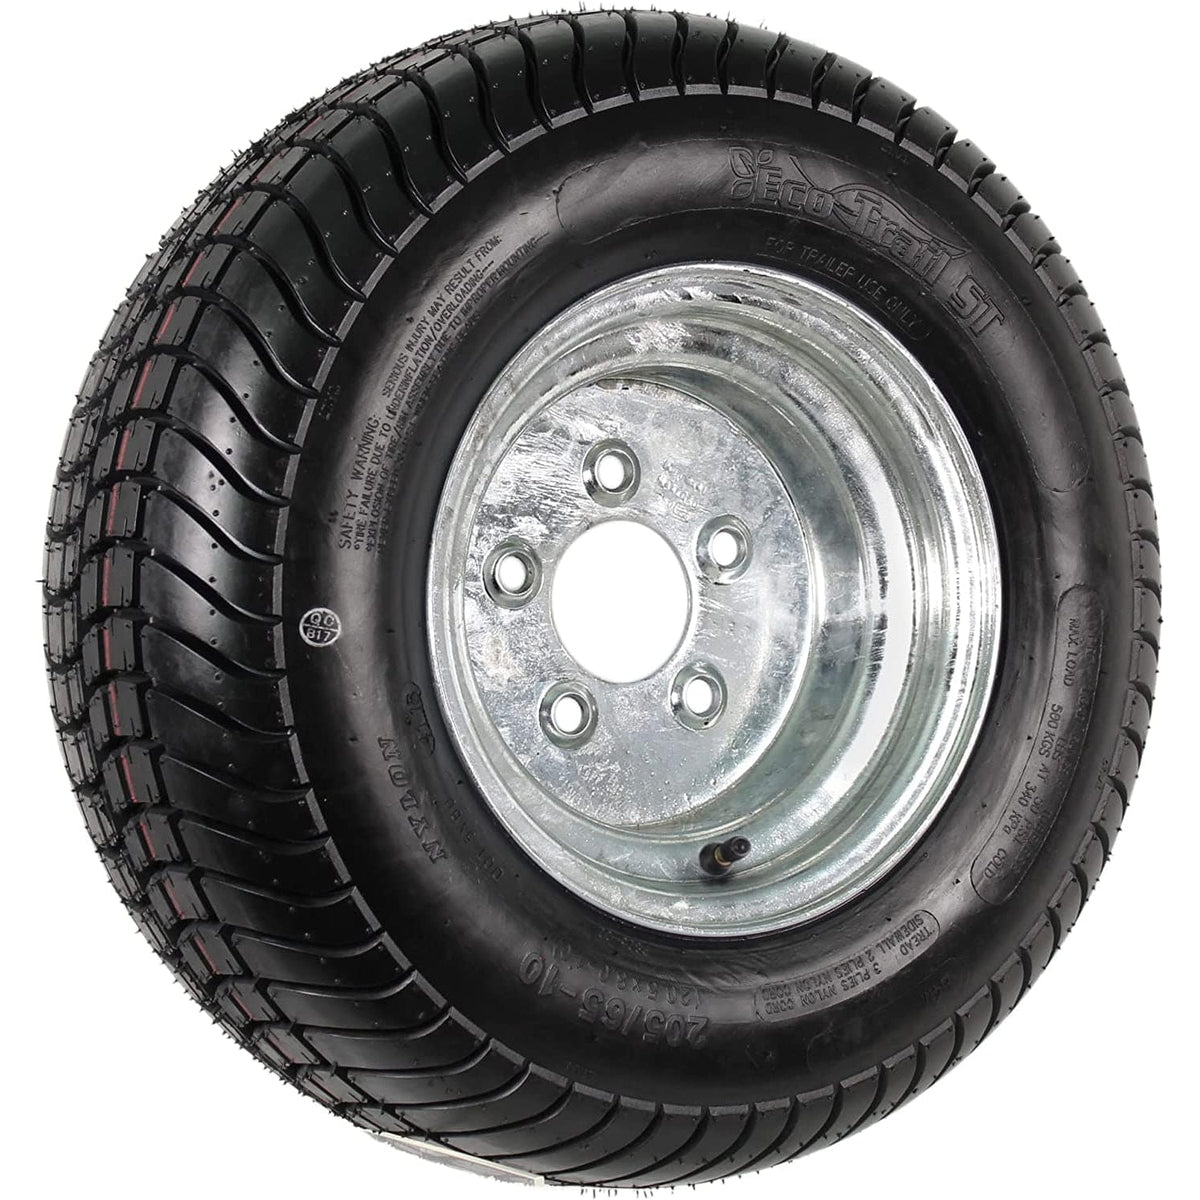 Tredit Tire & Wheel Qualifies for Free Shipping Tredit Tire & Wheel 20.5x8.0-10 5-Lug Tire/Wheel #Z760140